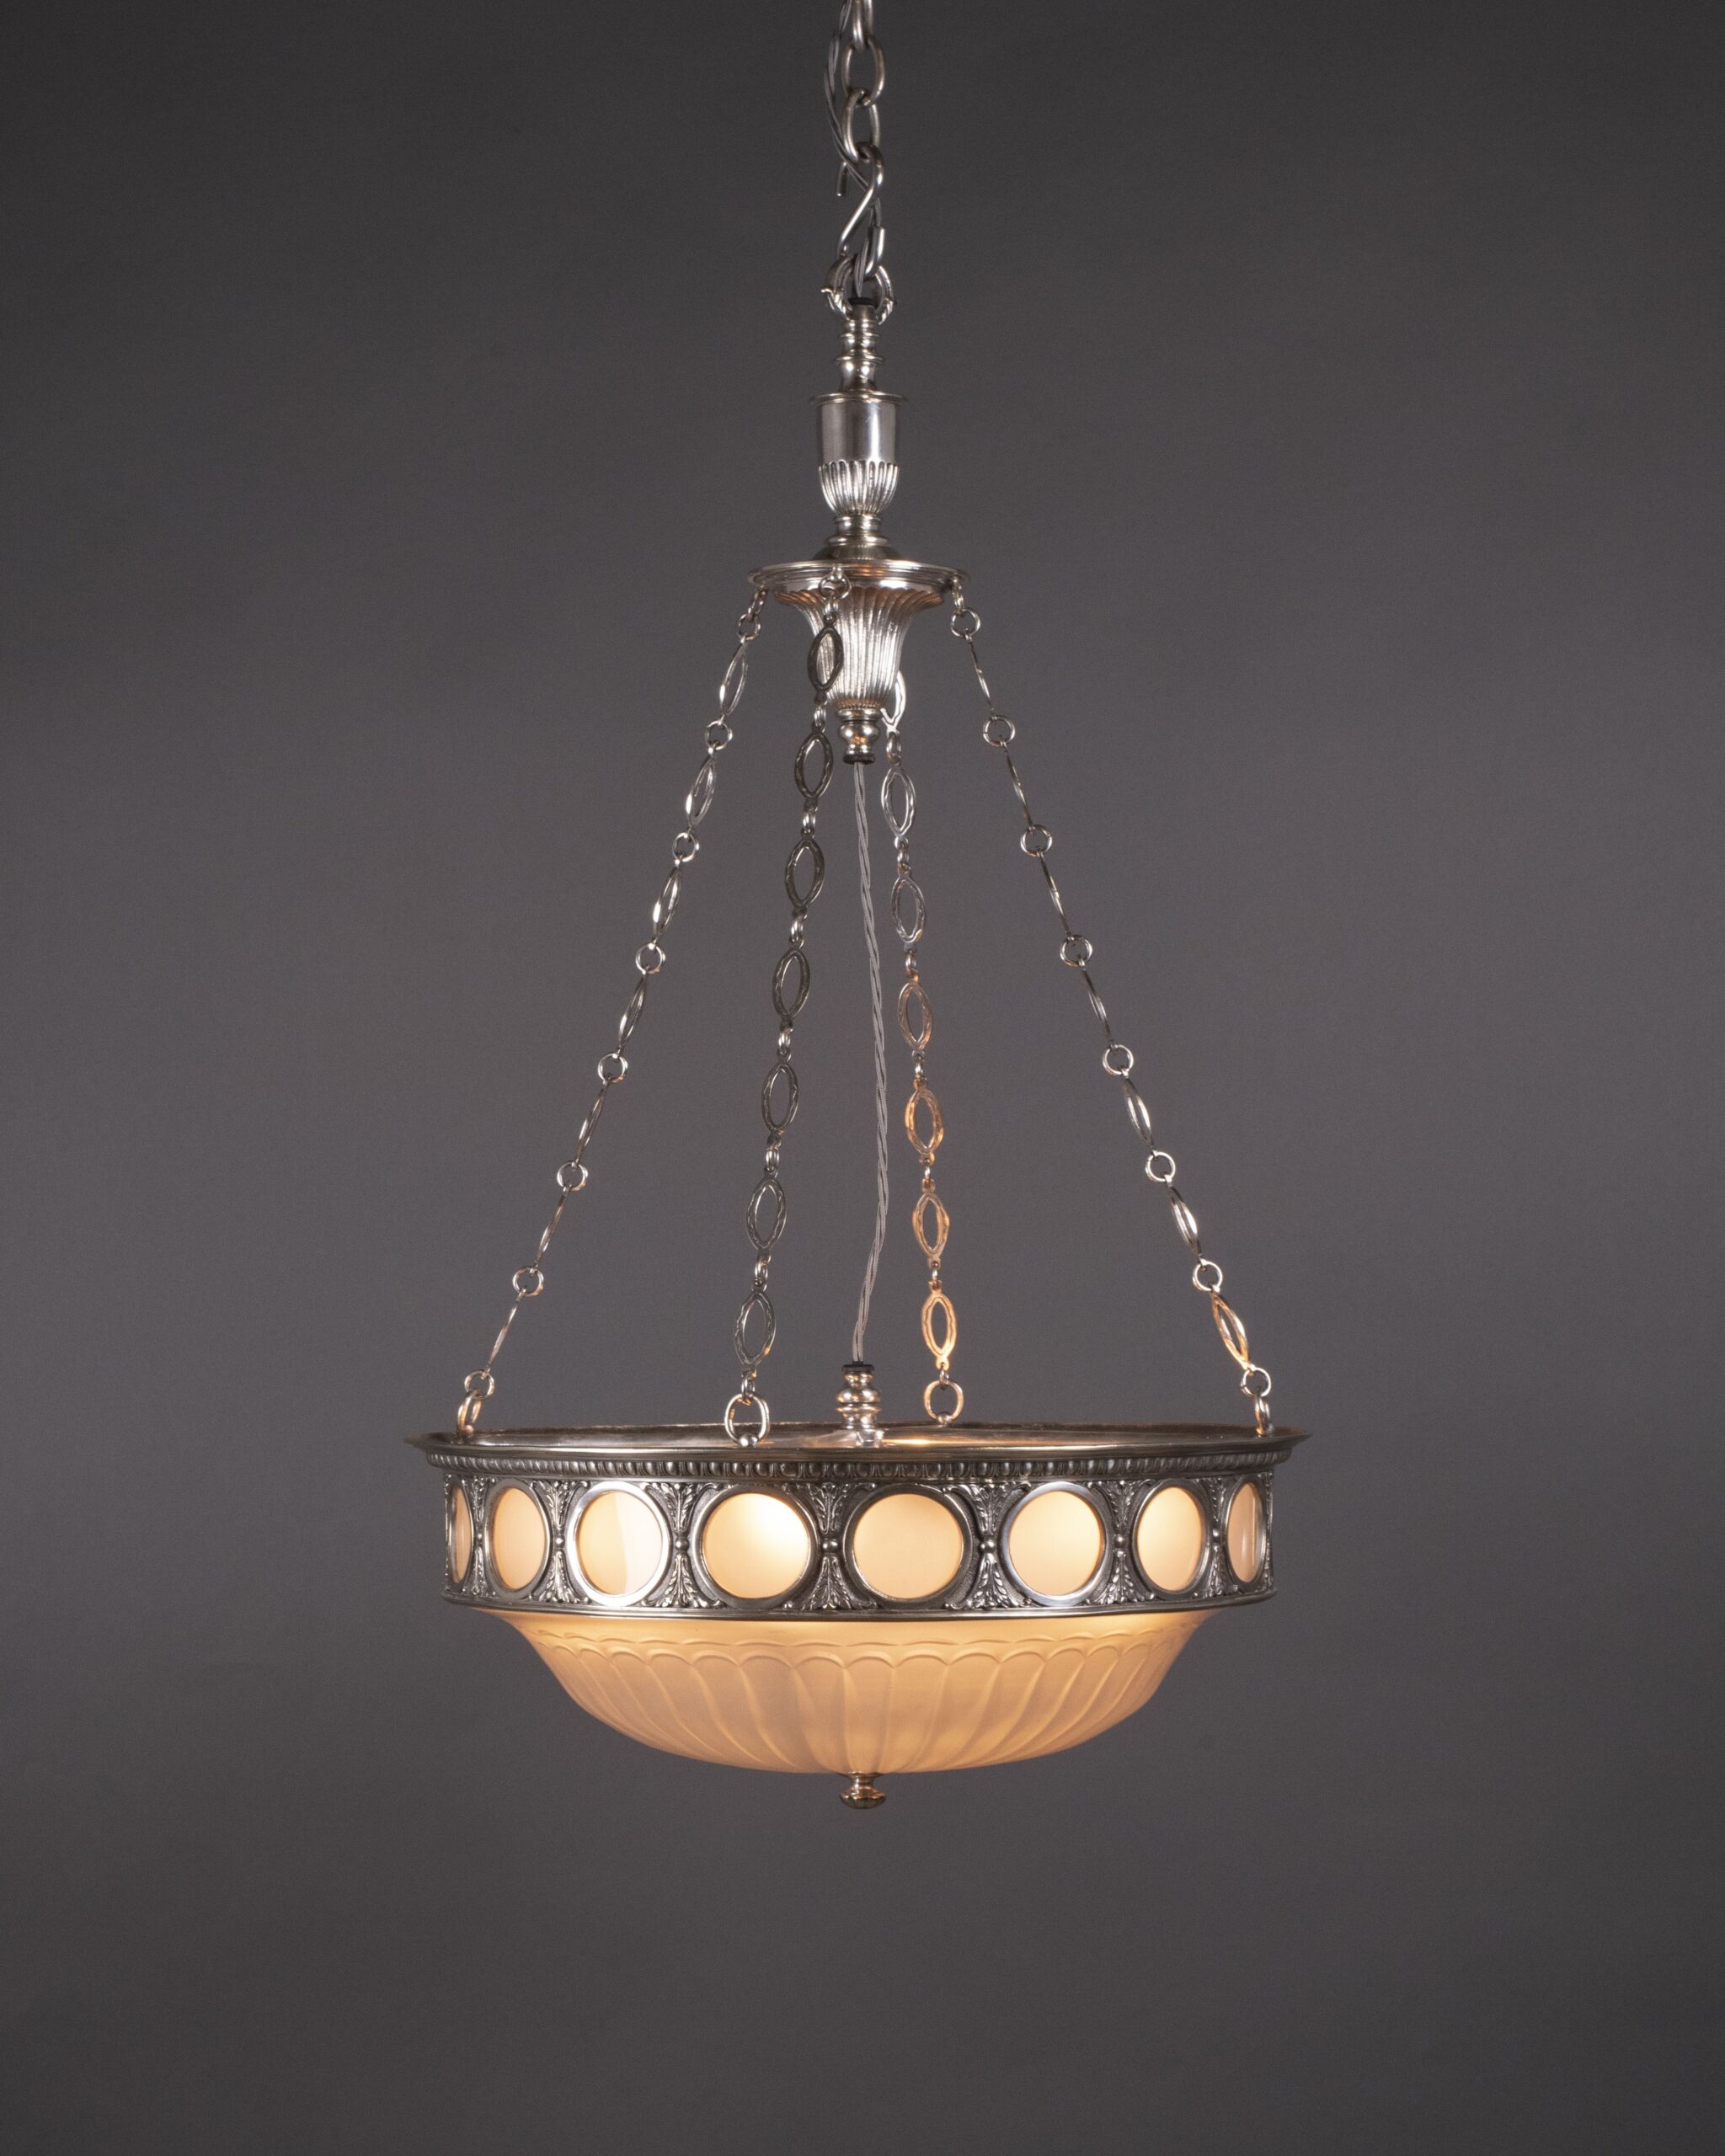 F&C Osler Antique Ceiling Light with Satin Glass Bowl